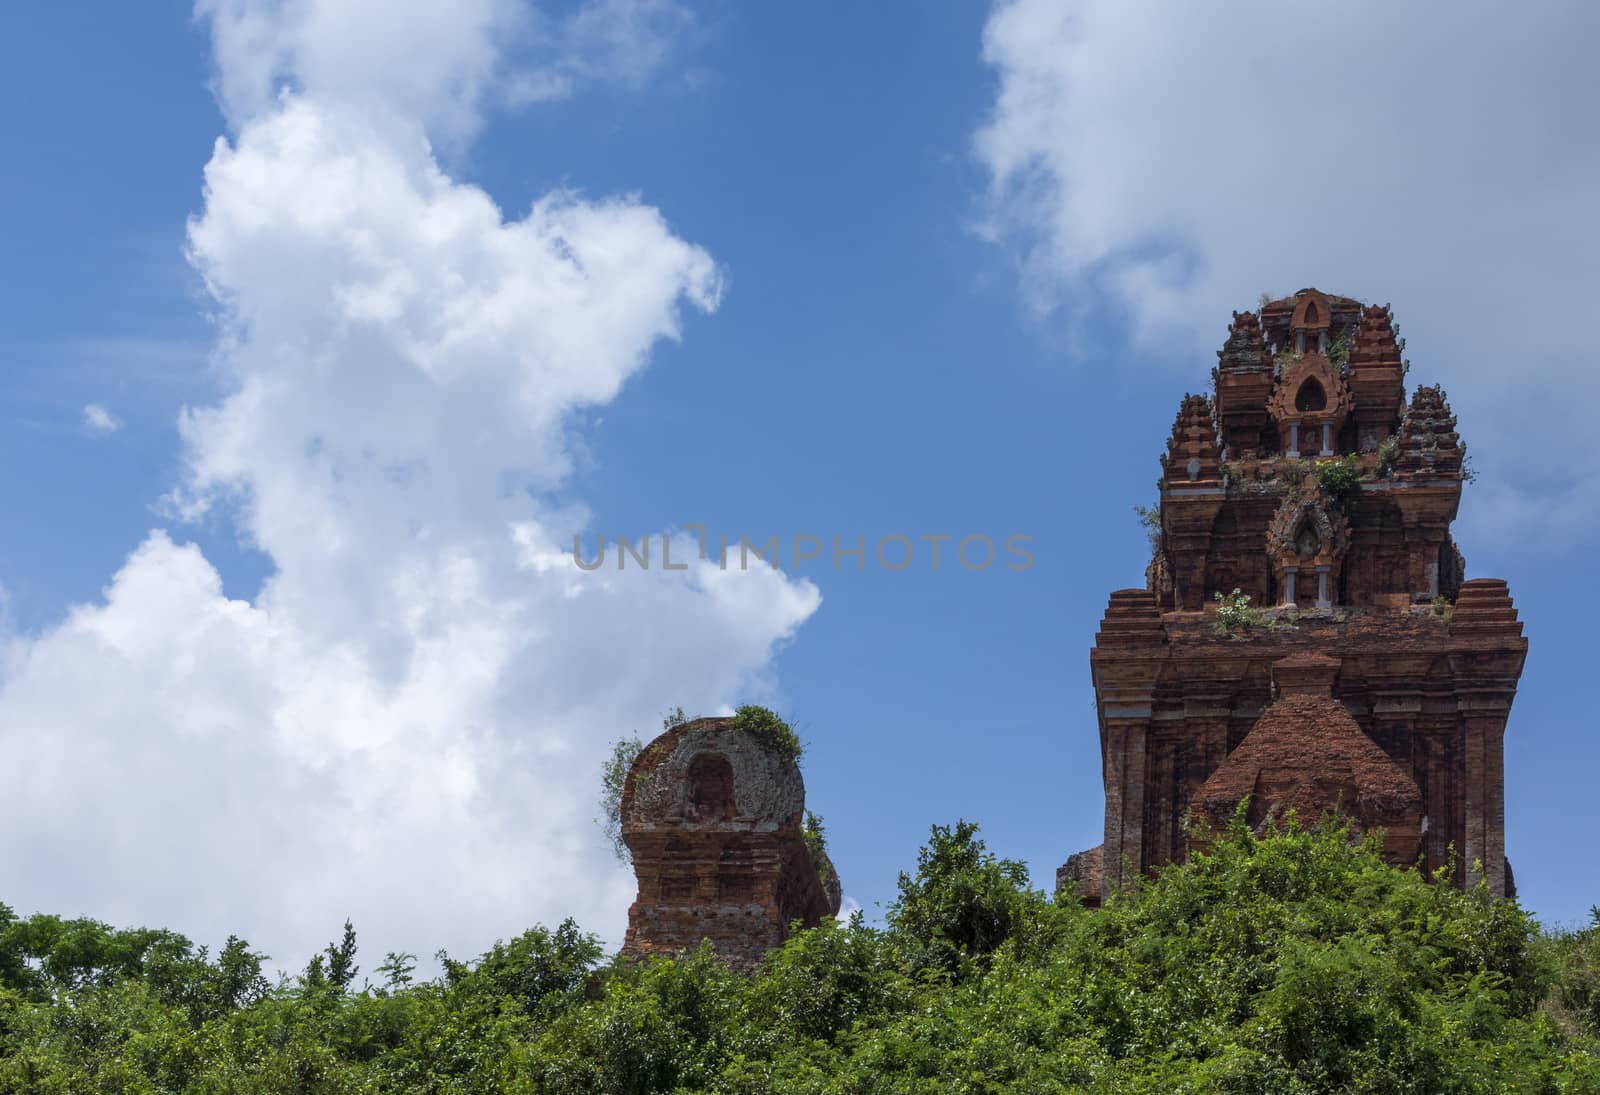 Vietnam: Banh It Cham towers against blue skies with white clouds.